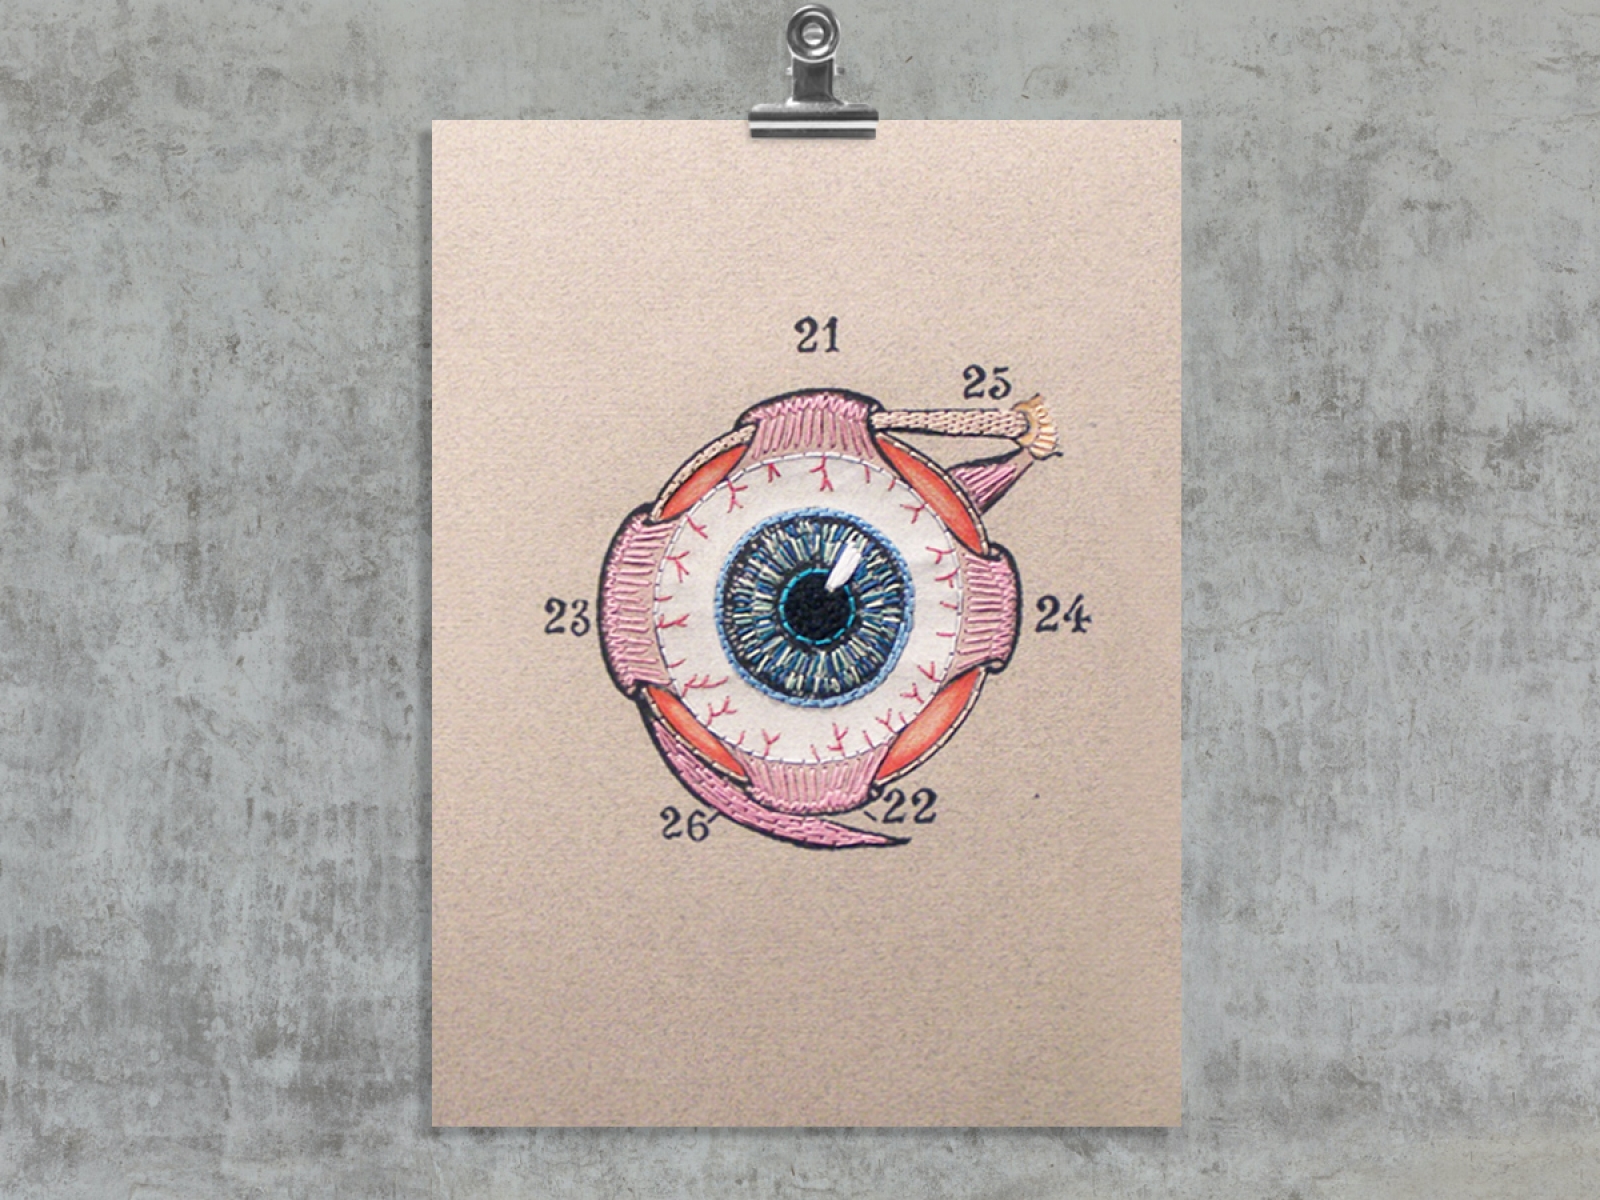 Eye Anatomy. Paper Embroidery by Fabulous Cat Papers